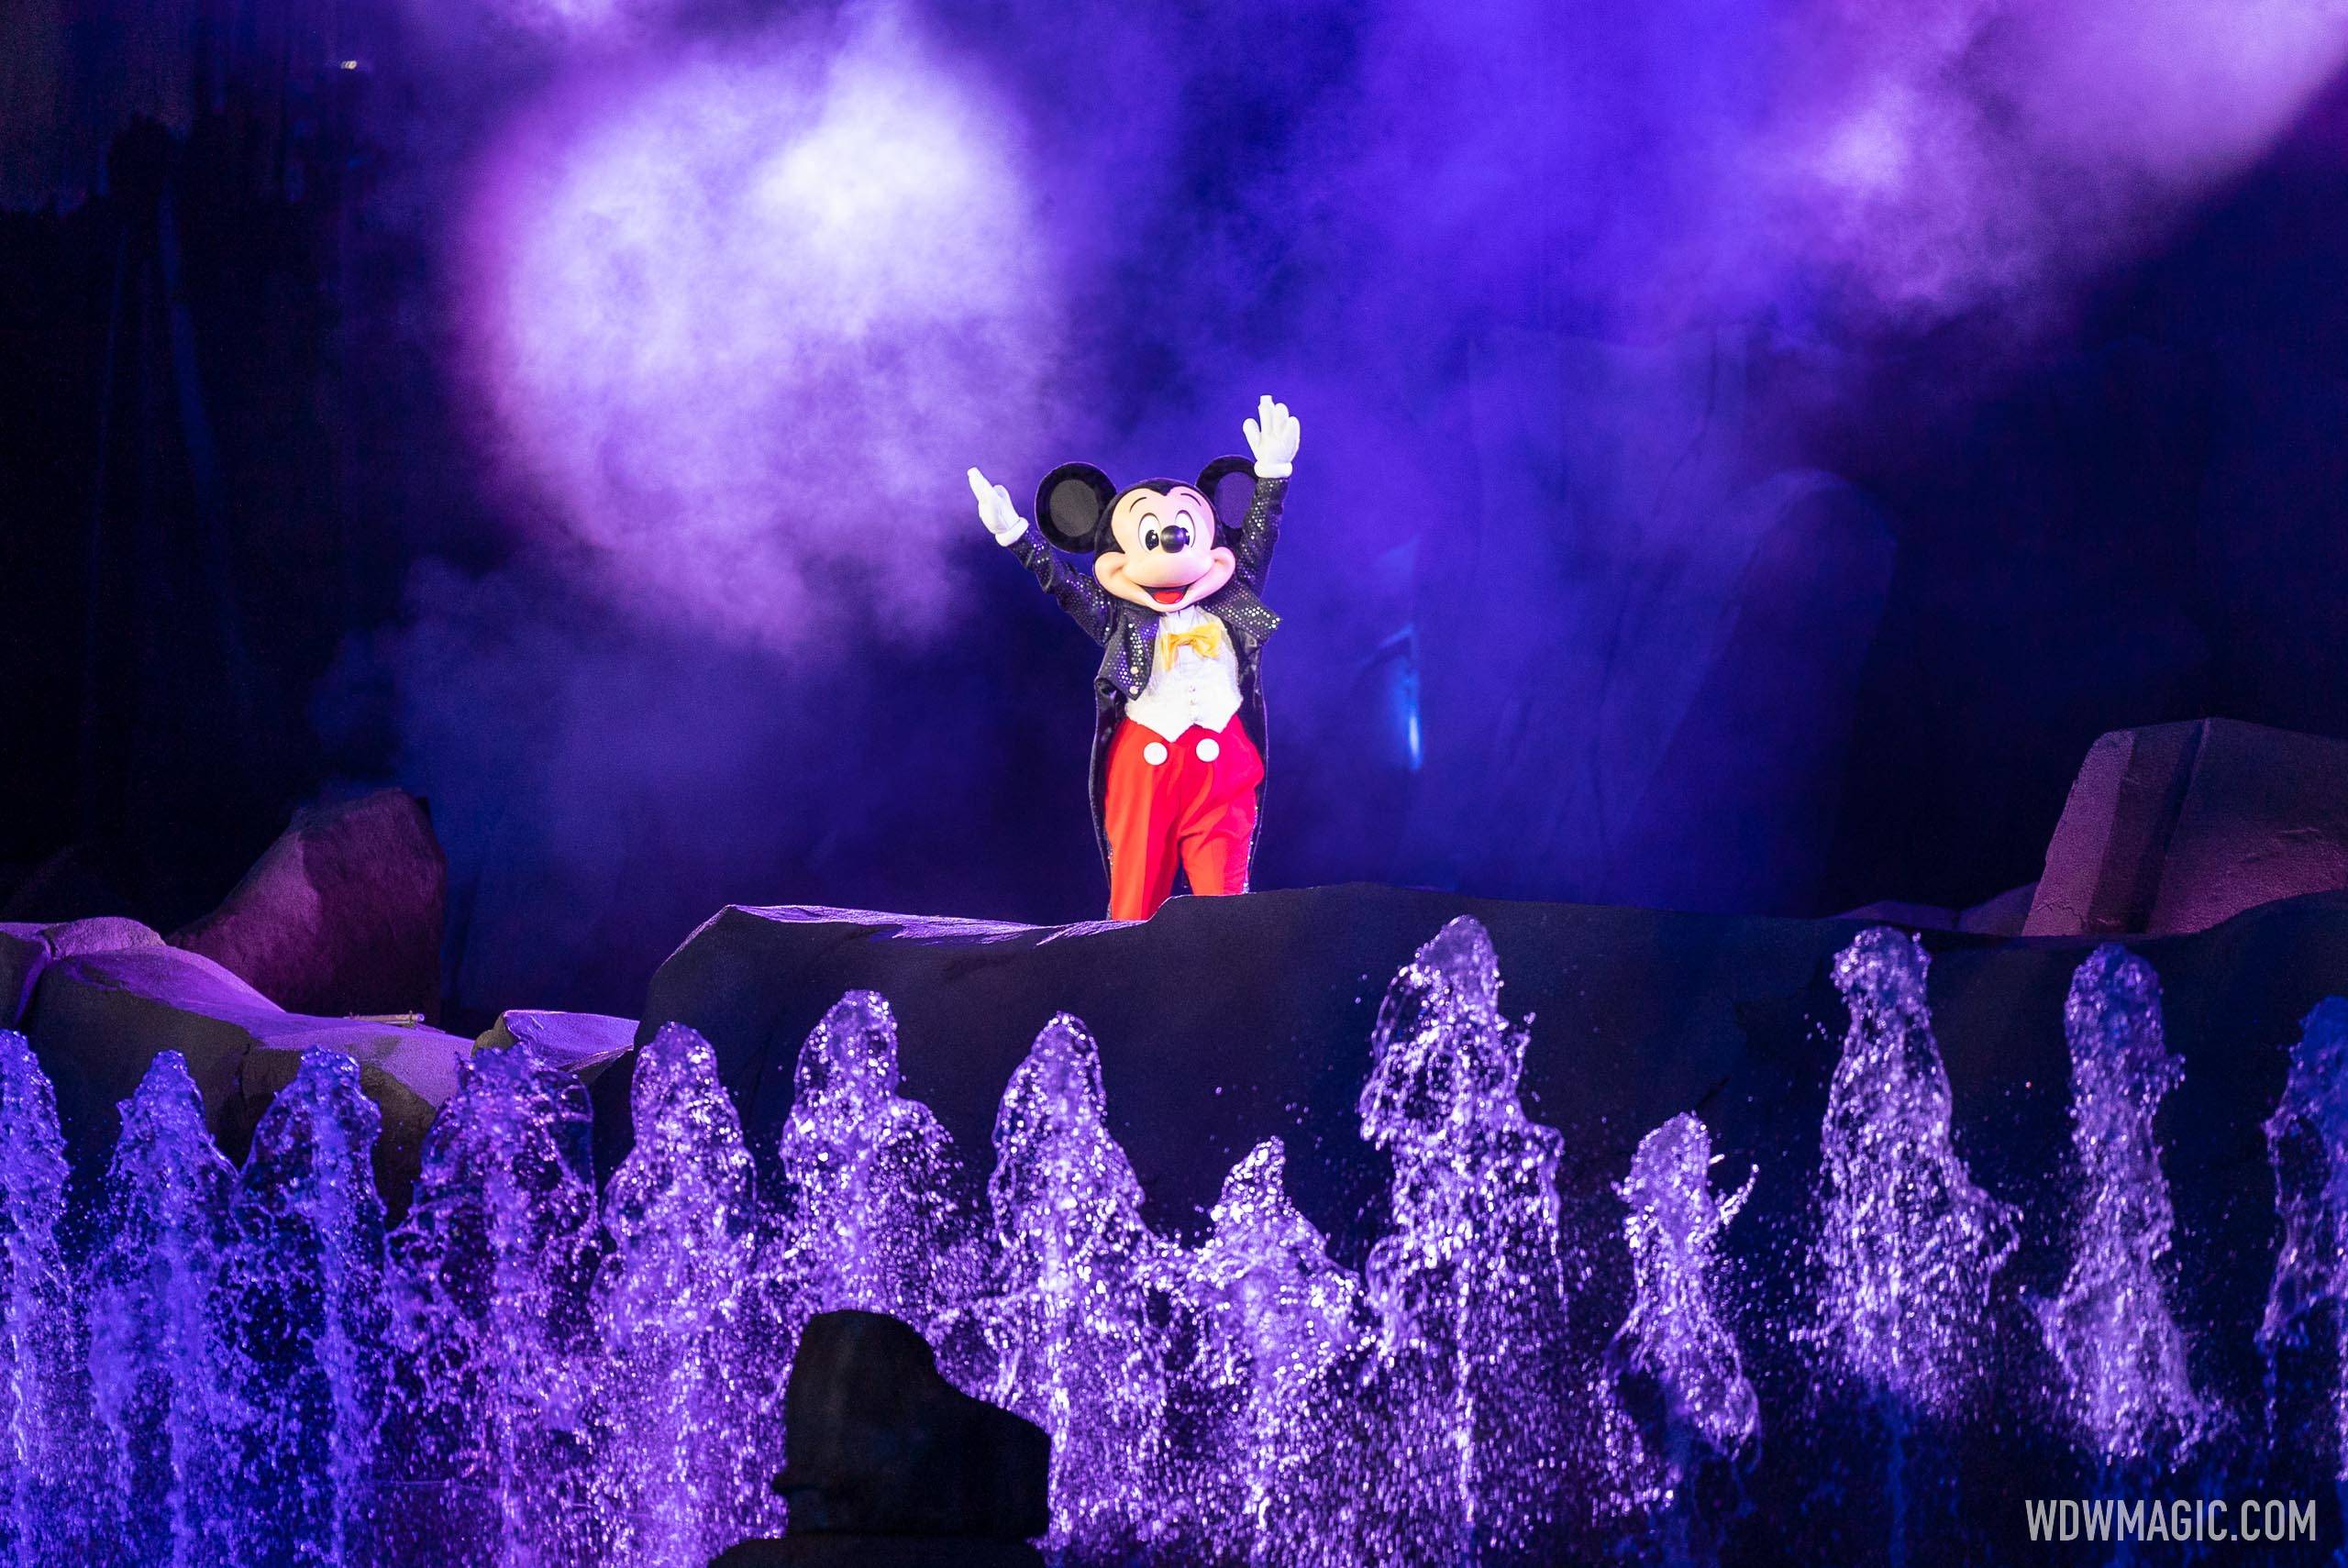 Second showing of Fantasmic! for Thursday now not expected to take place